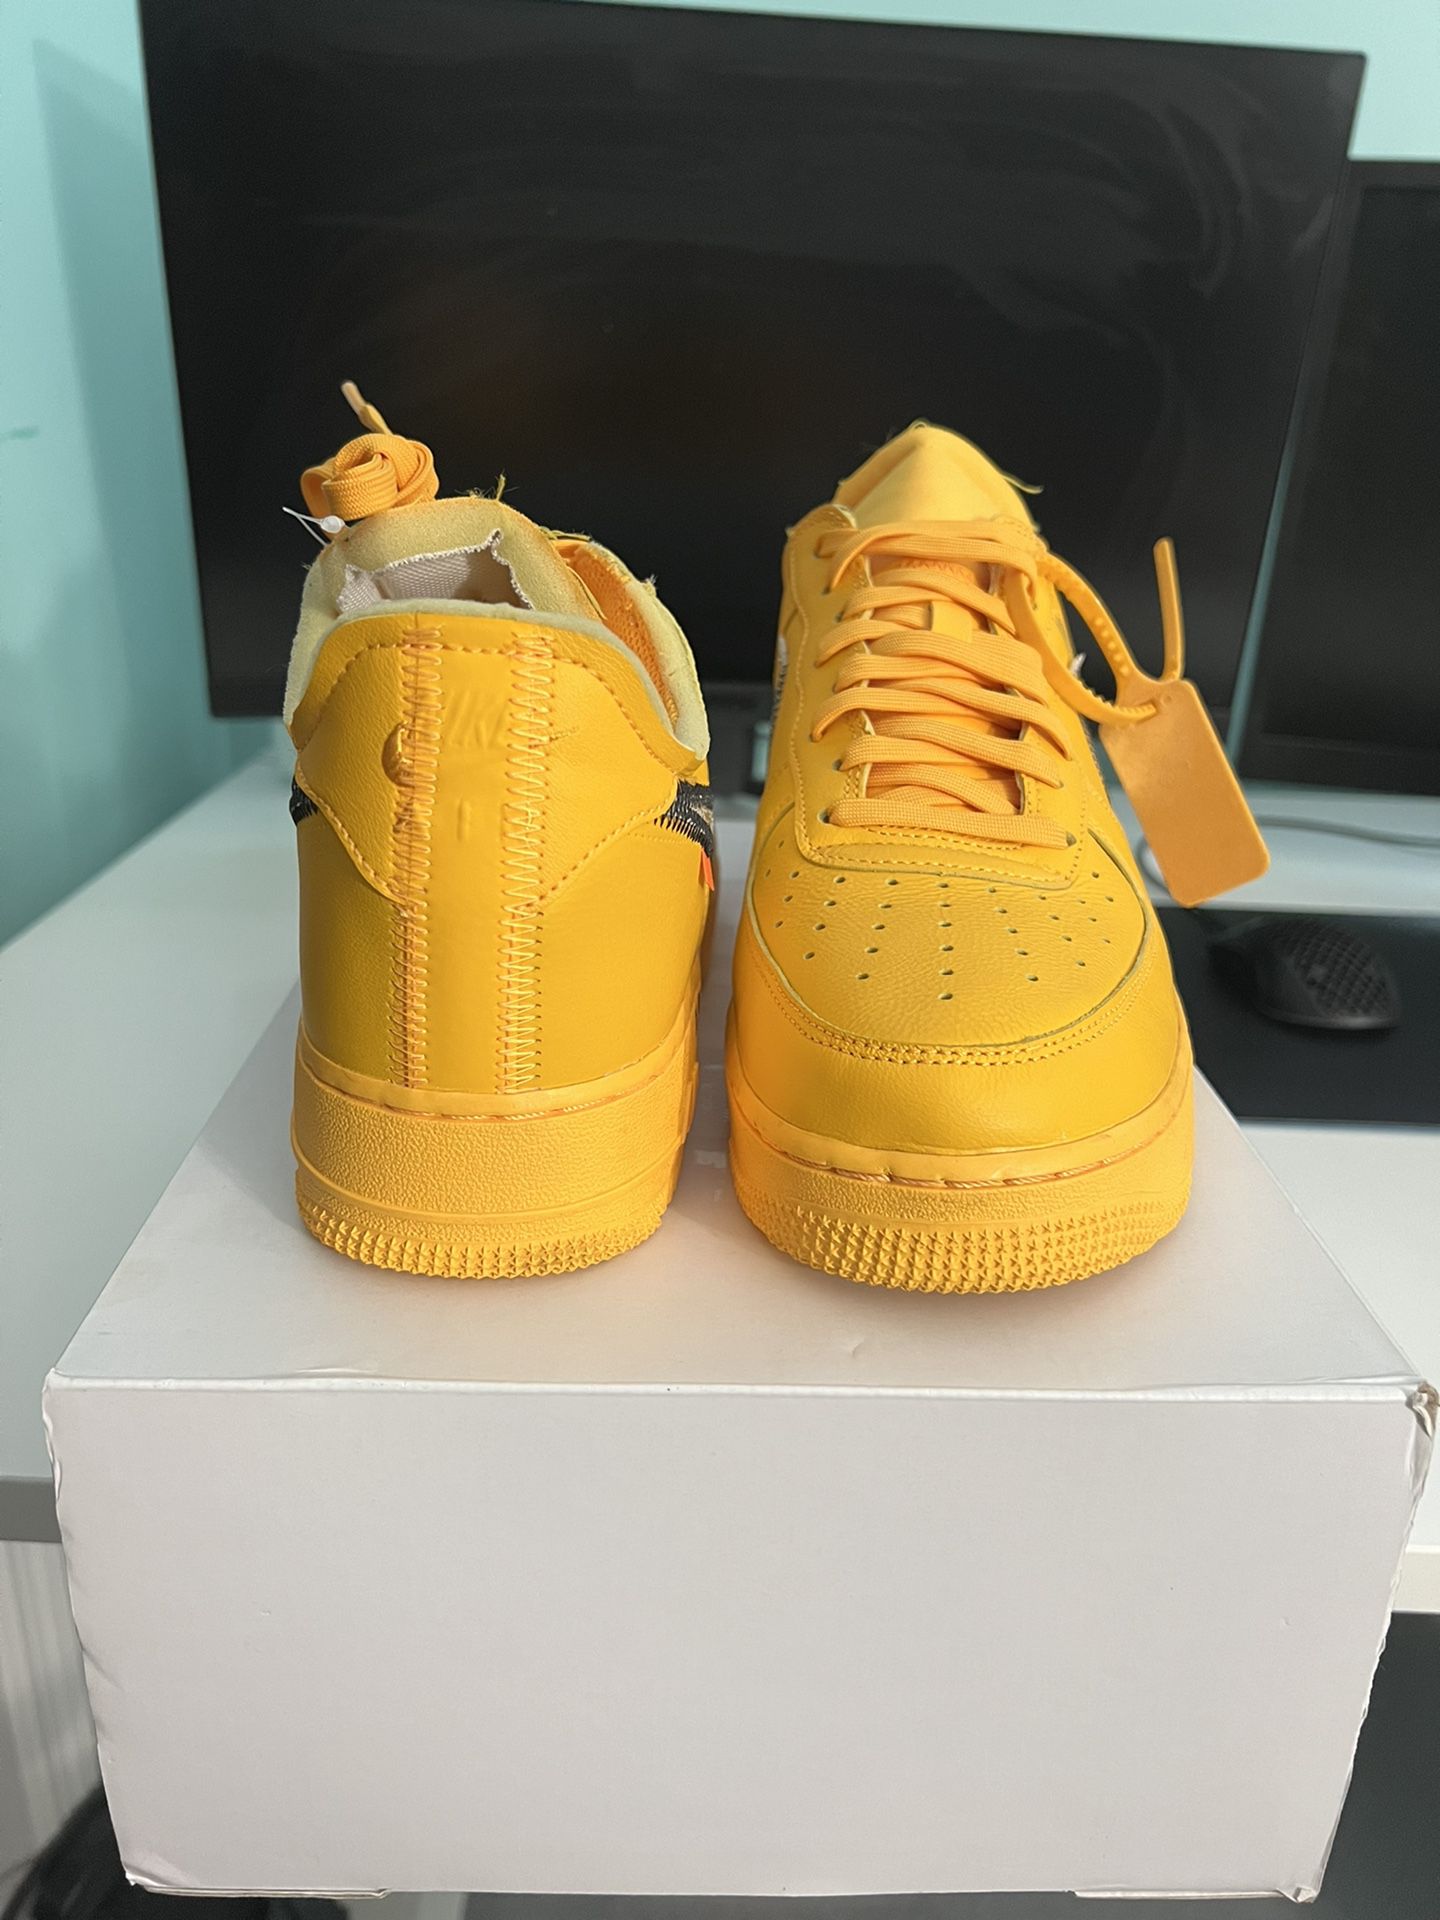 Nike Air Force 1 Low Off White University Gold Available in store now! Size  10.5 Worn 1x - $1700